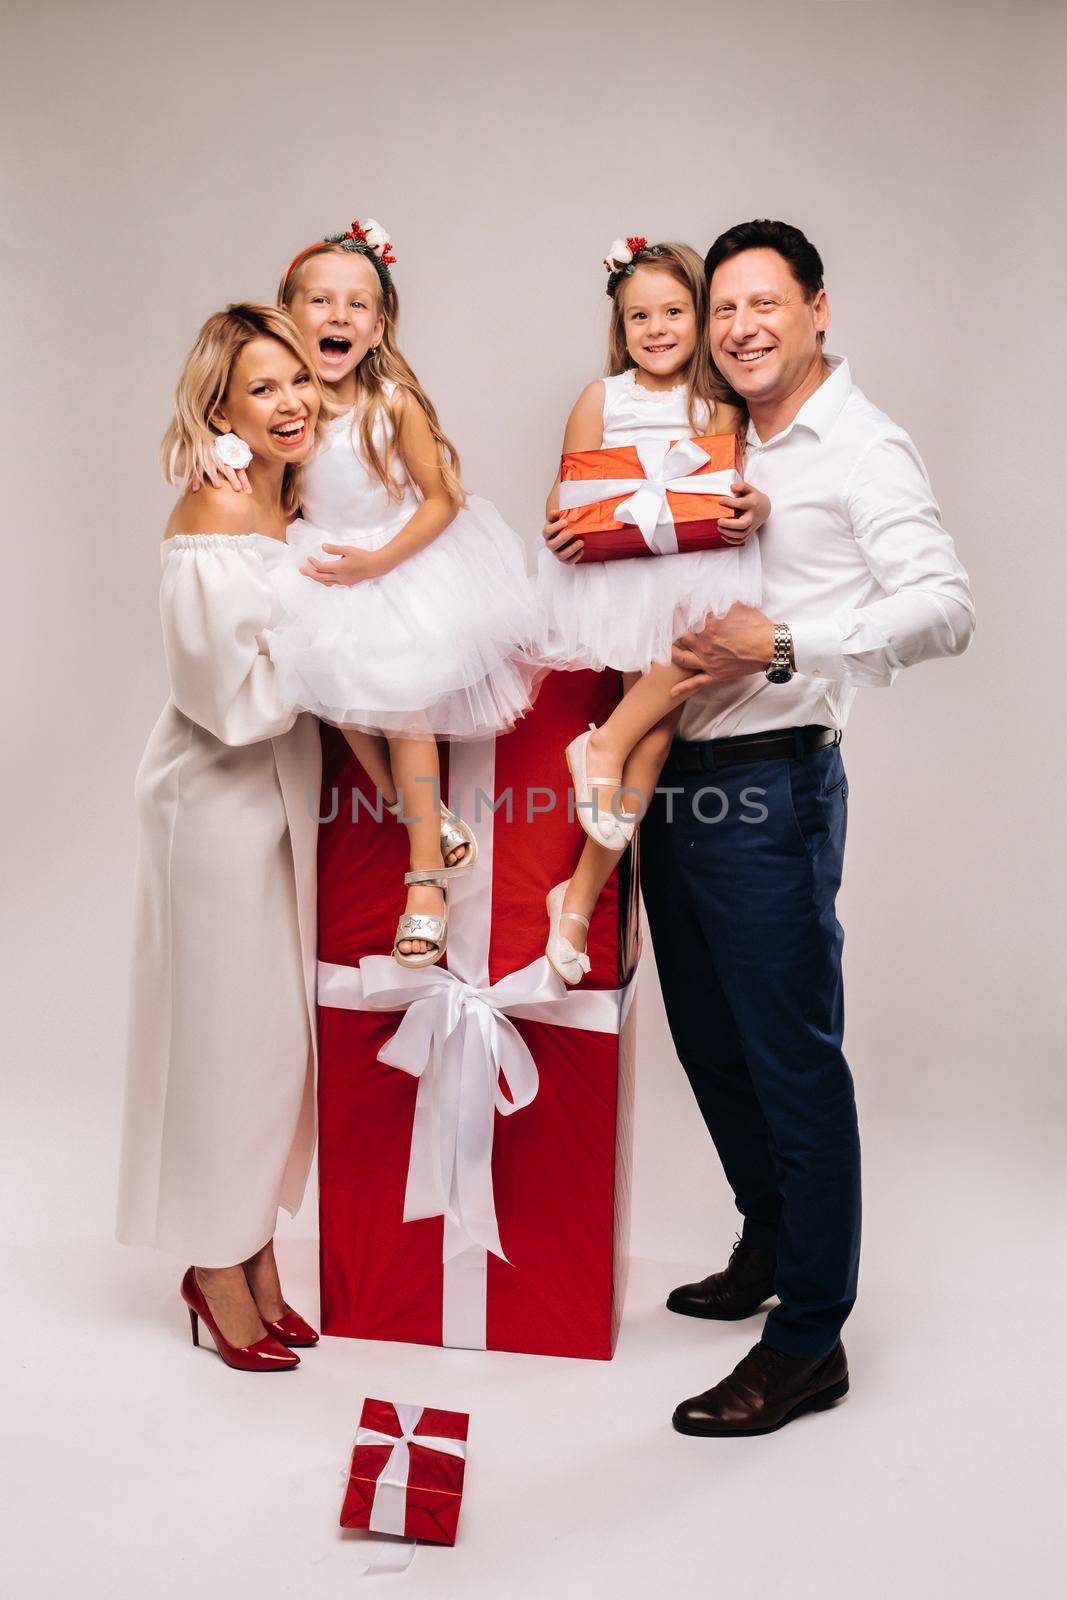 Portrait of a happy family with gifts in their hands on a beige background.